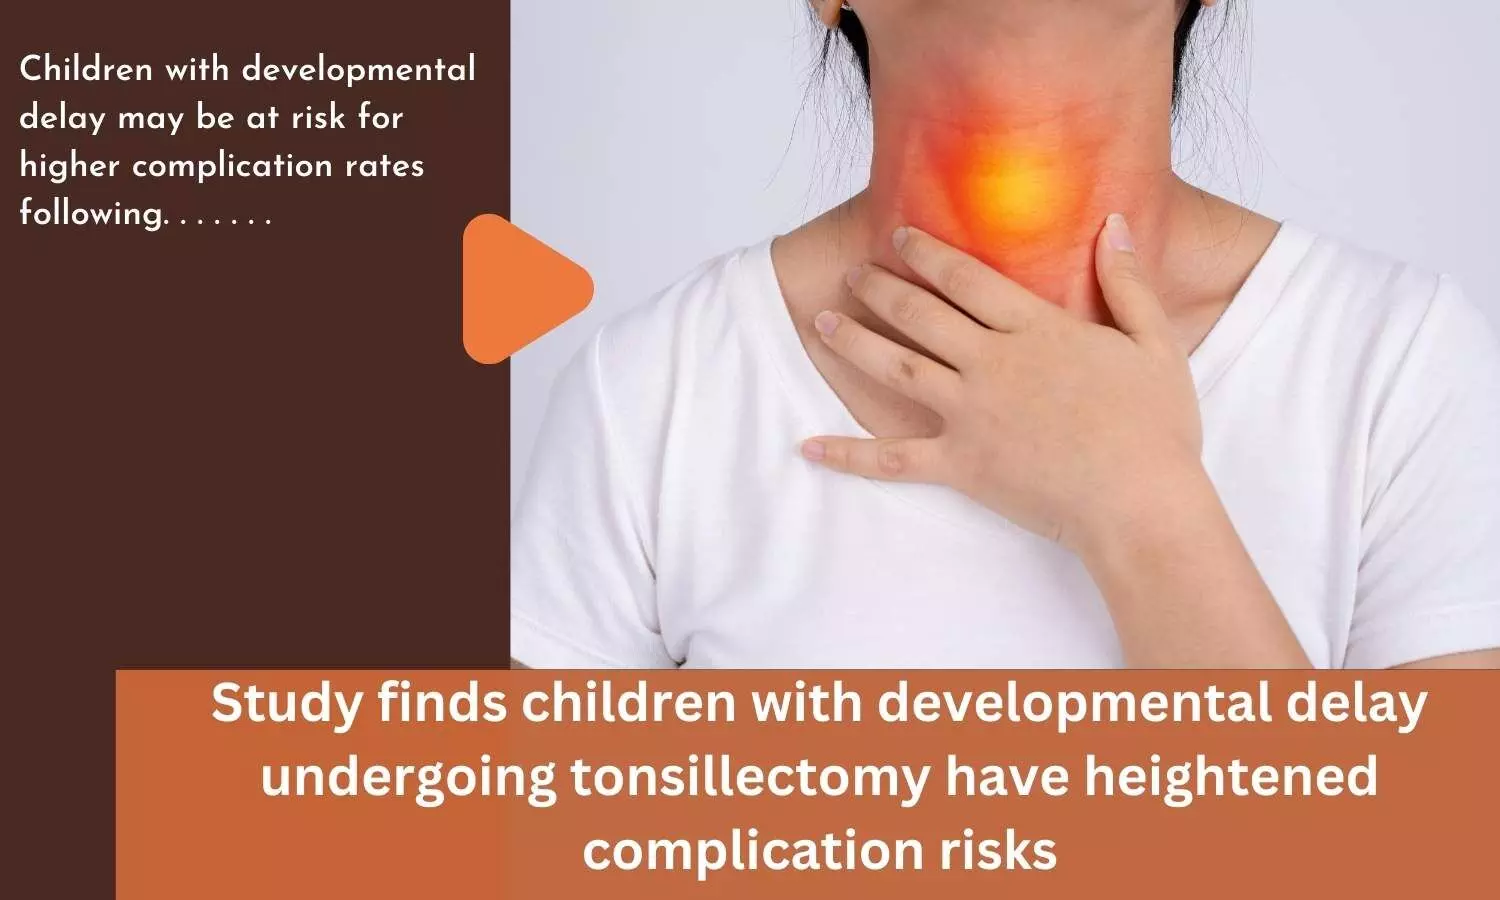 Study finds children with developmental delay undergoing tonsillectomy have heightened complication risks